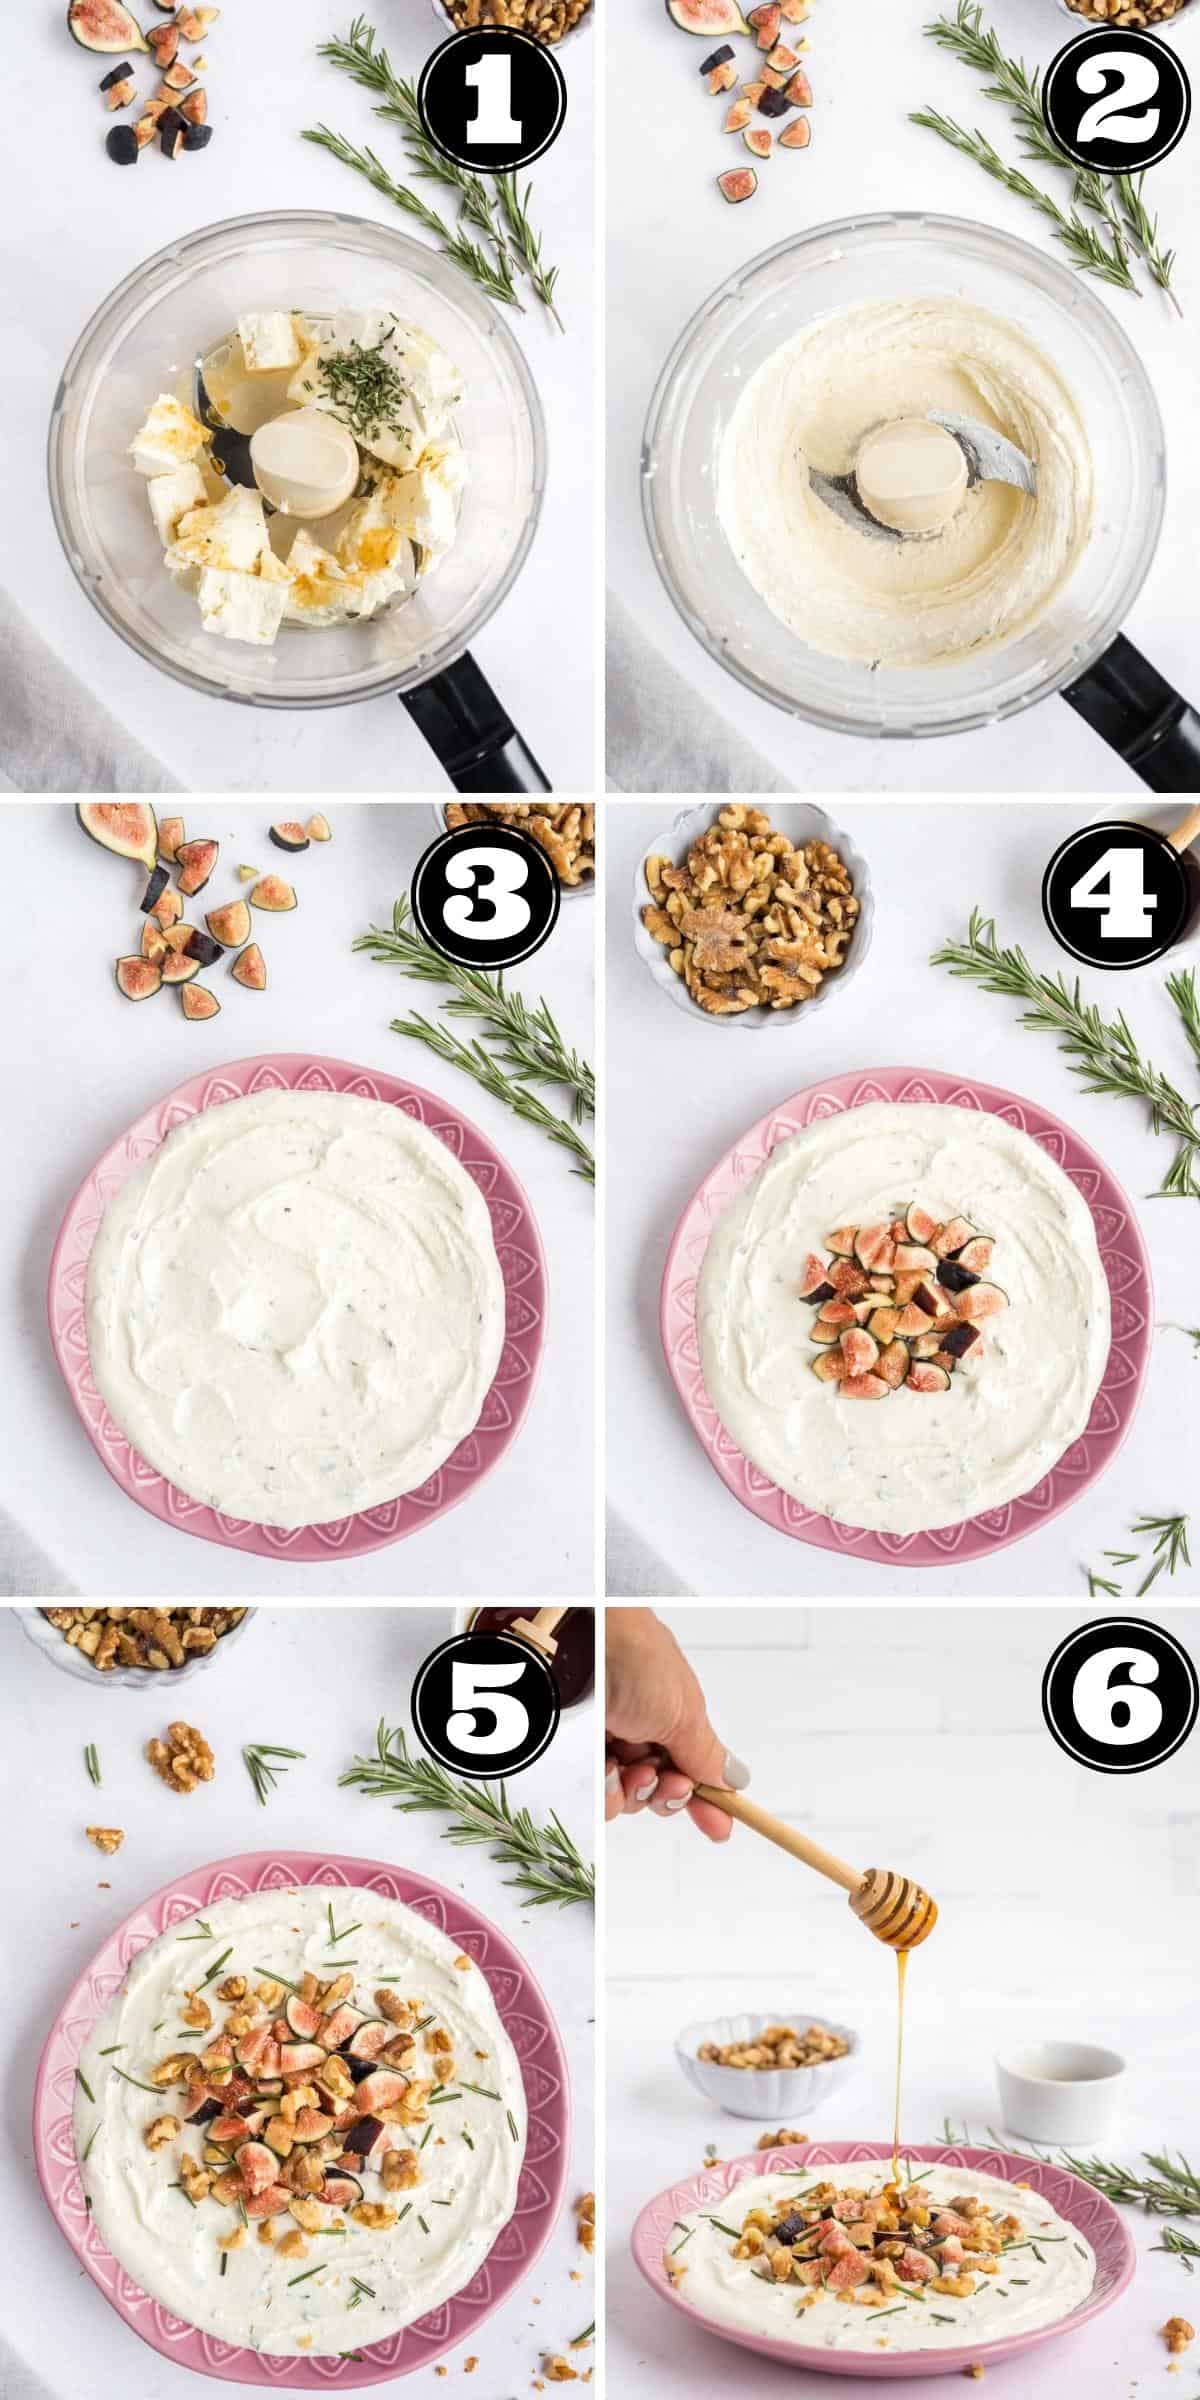 Collage image showing adding figs, nuts, herbs and honey toppings to whipped feta dip.